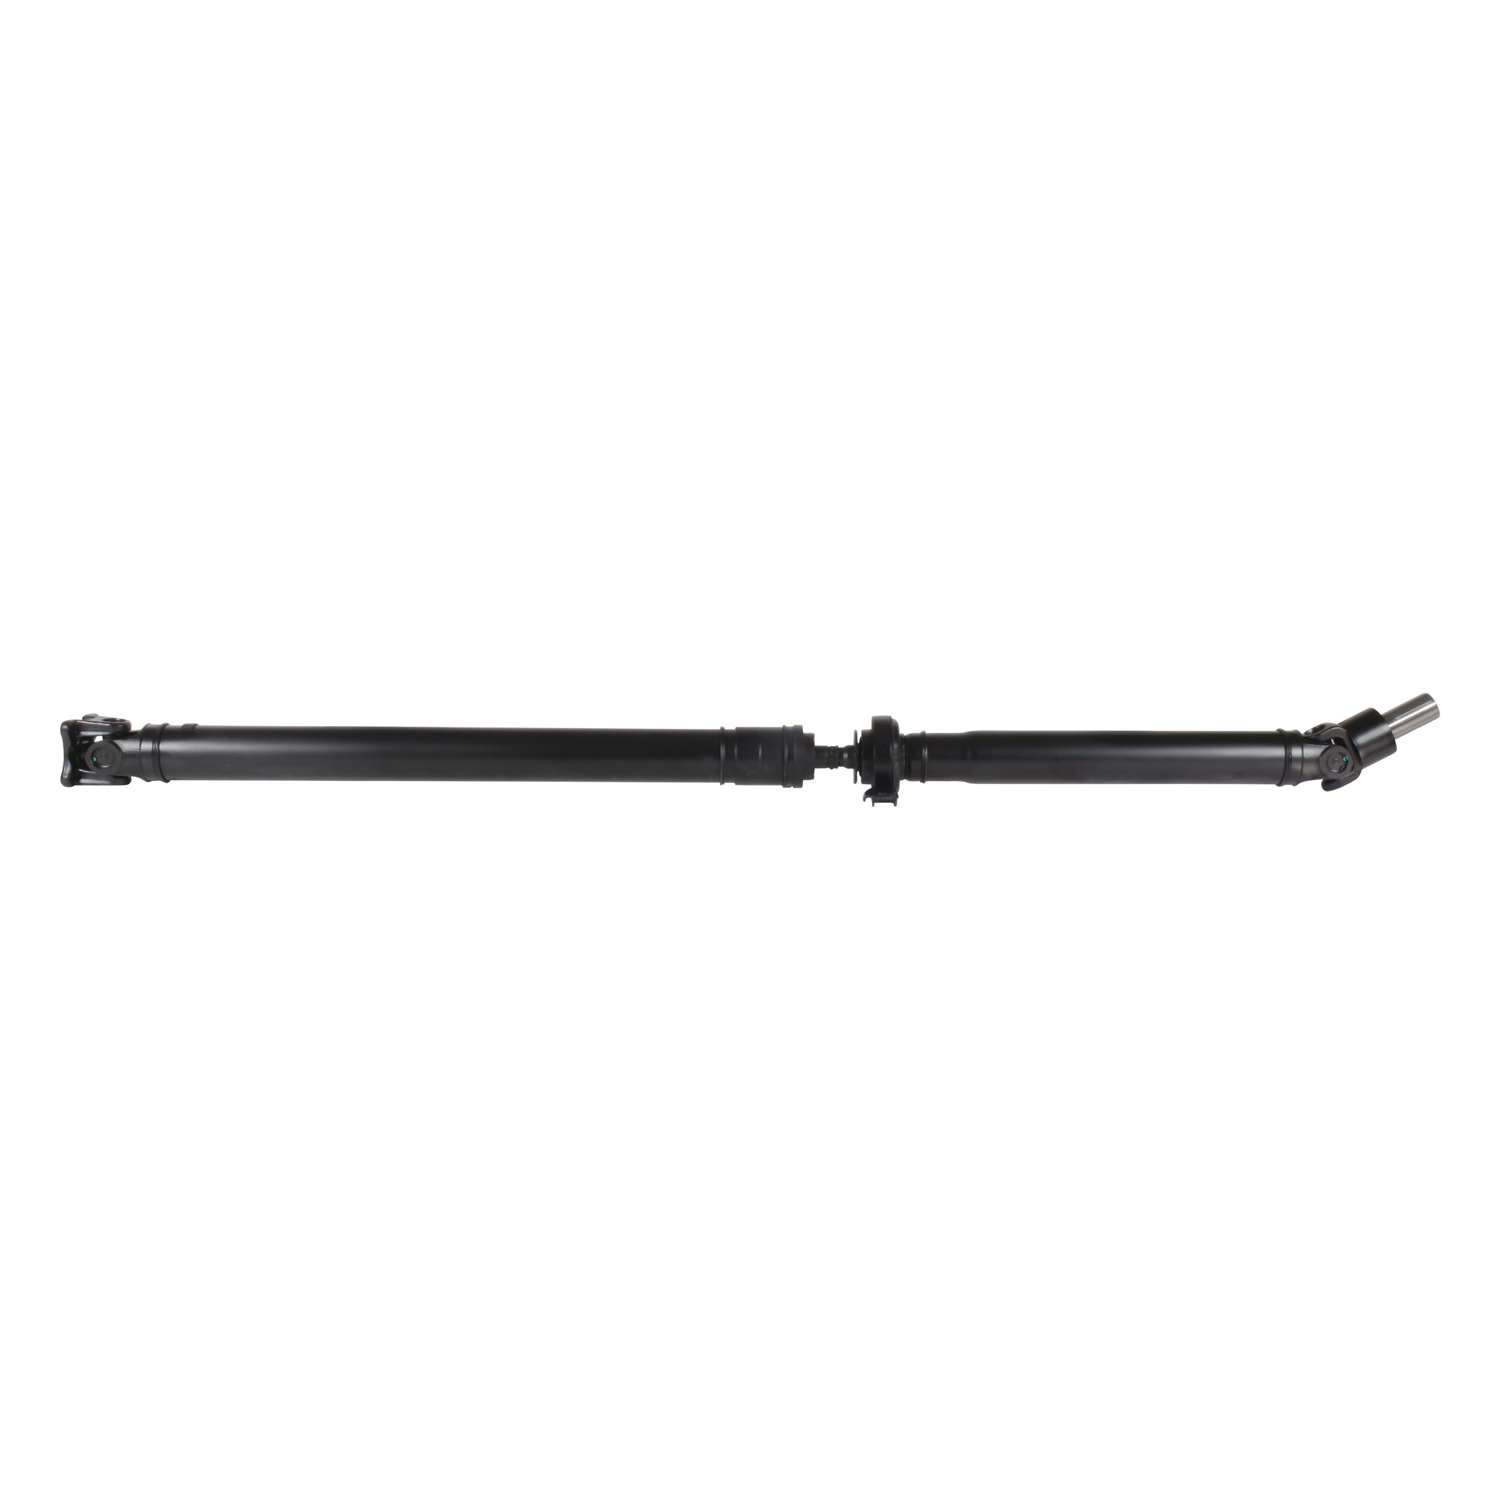 Rear Driveshaft, 2000 Subaru Legacy Outback with A/T, 62.25" NOMINAL LENGTH